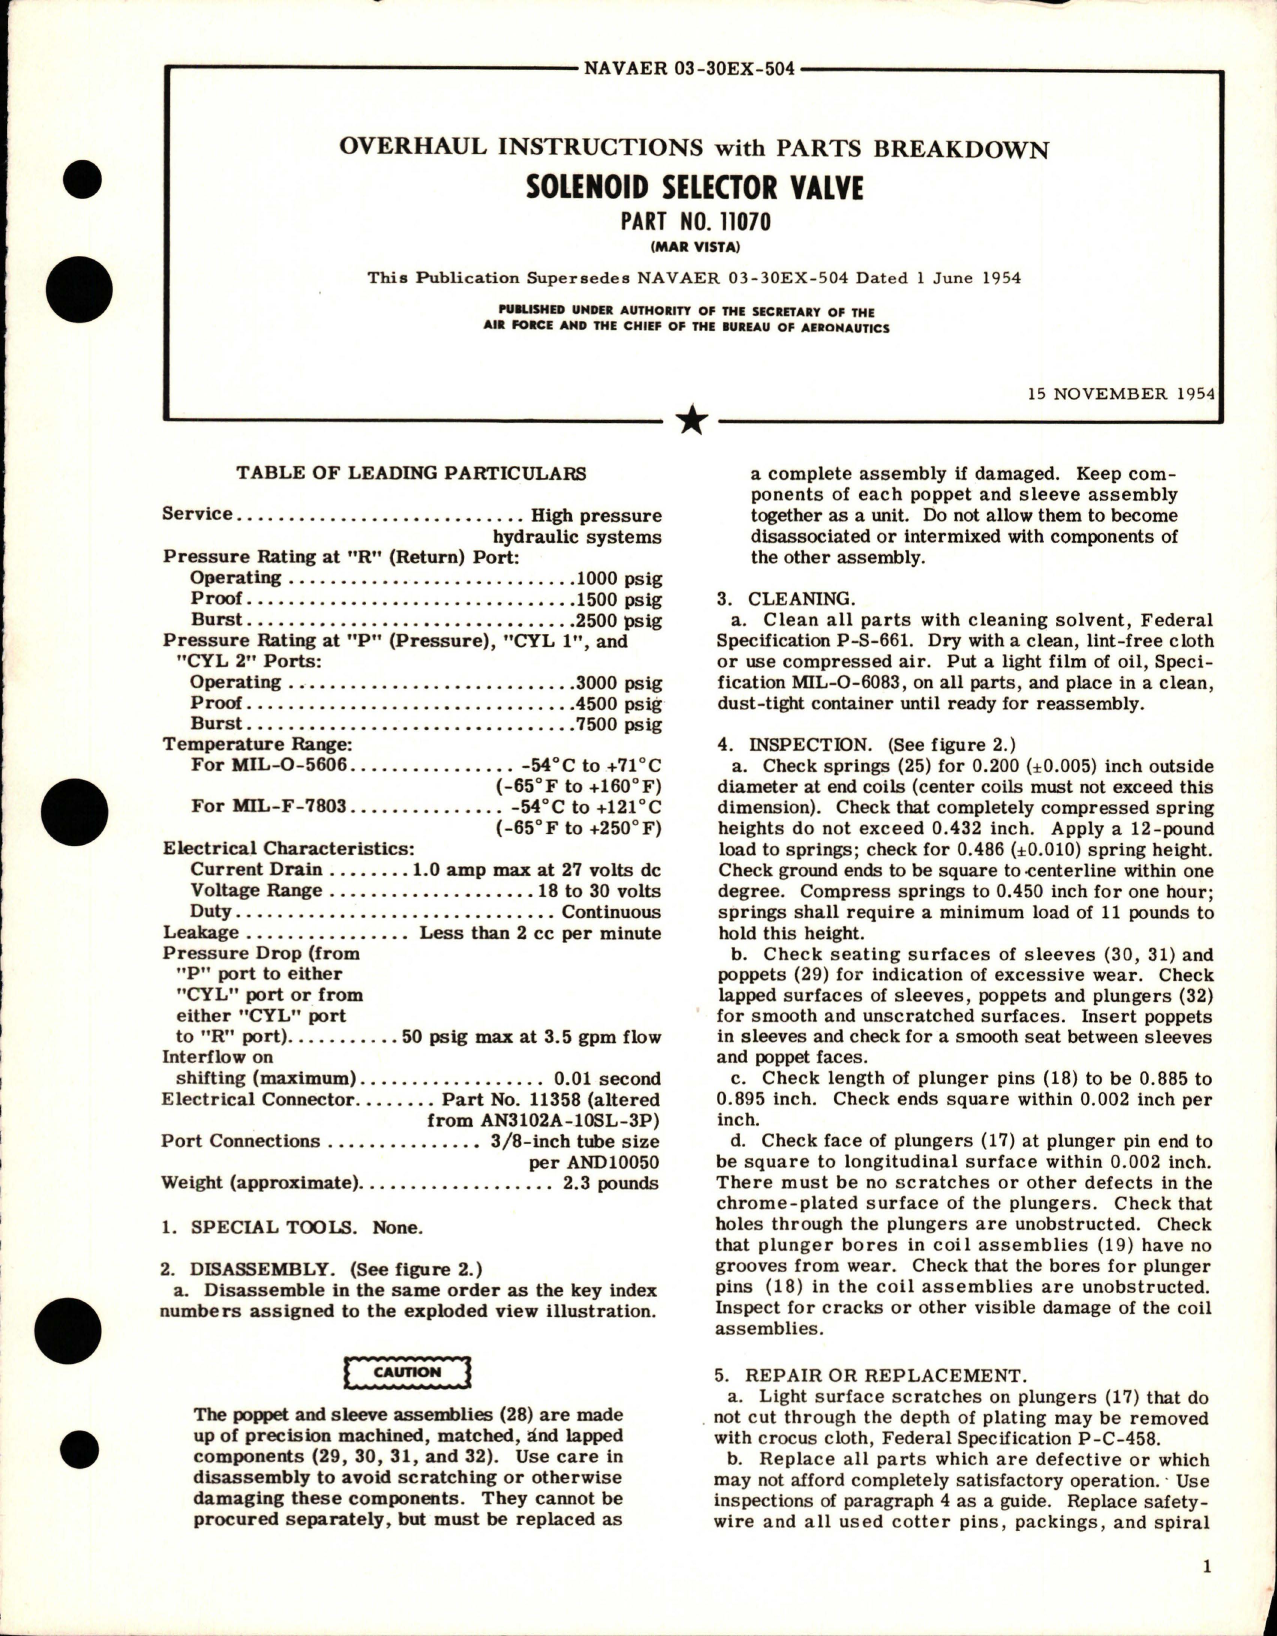 Sample page 1 from AirCorps Library document: Overhaul Instructions with Parts Breakdown for Solenoid Selector Valve - Part 11070